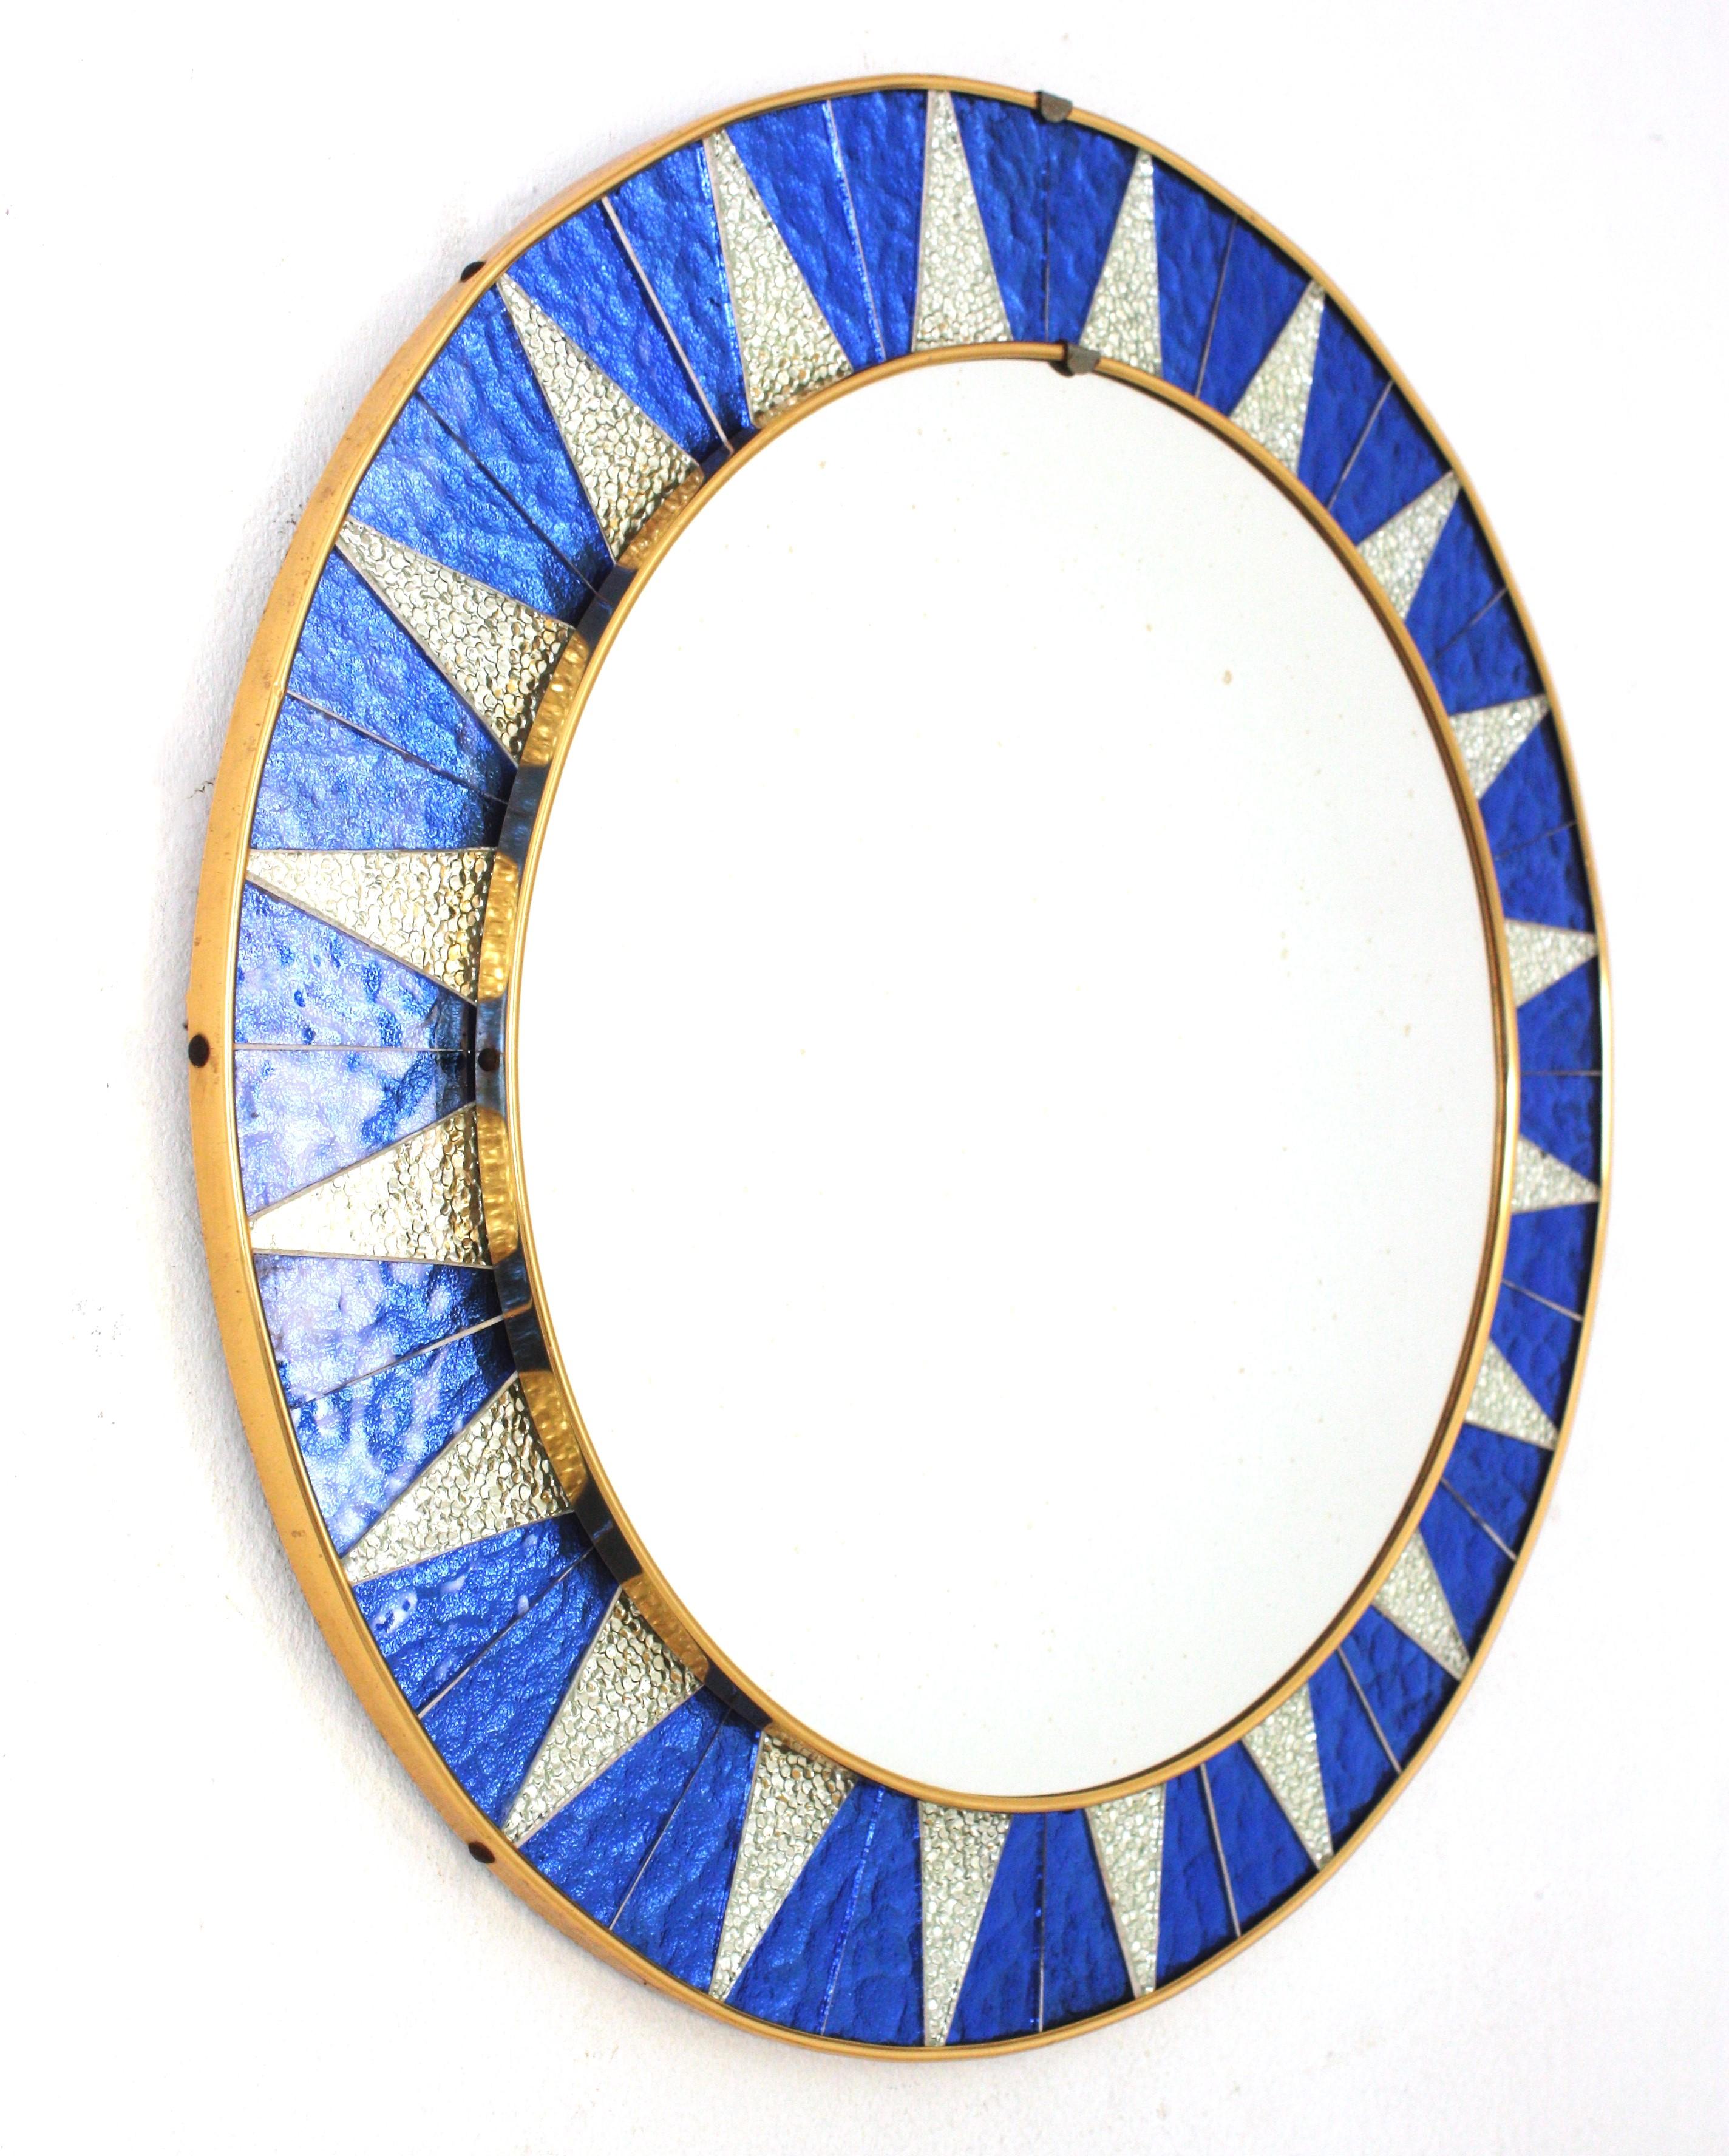 Mid-Century Modern Sunburst Mirror with Blue and Silvered Mosaic Glass Frame, Spain, 1960s For Sale